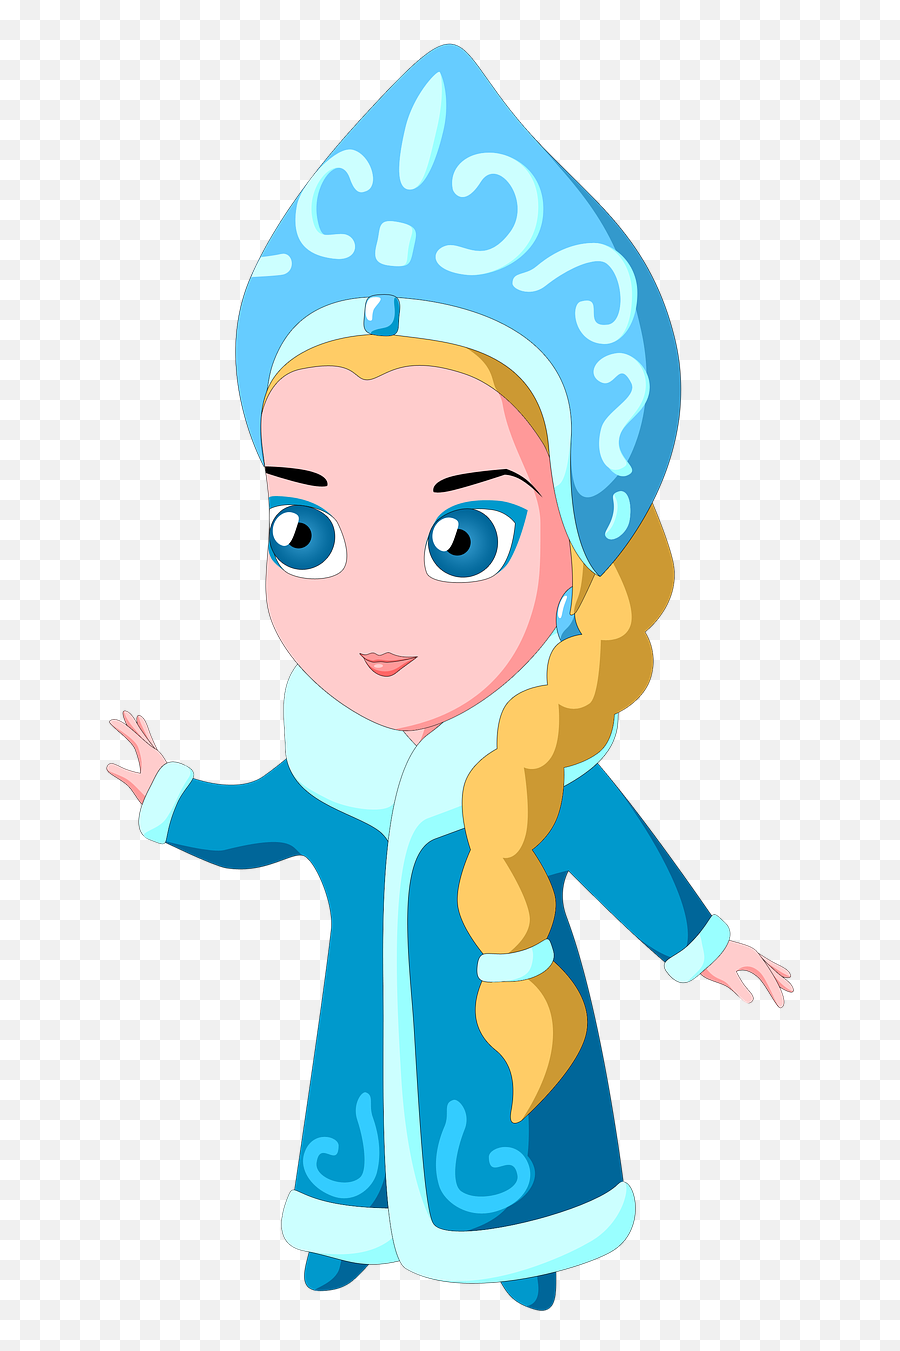 Snow Maiden Young Woman Russian - Free Image On Pixabay Emoji,Cartoon Pople Different Emotions